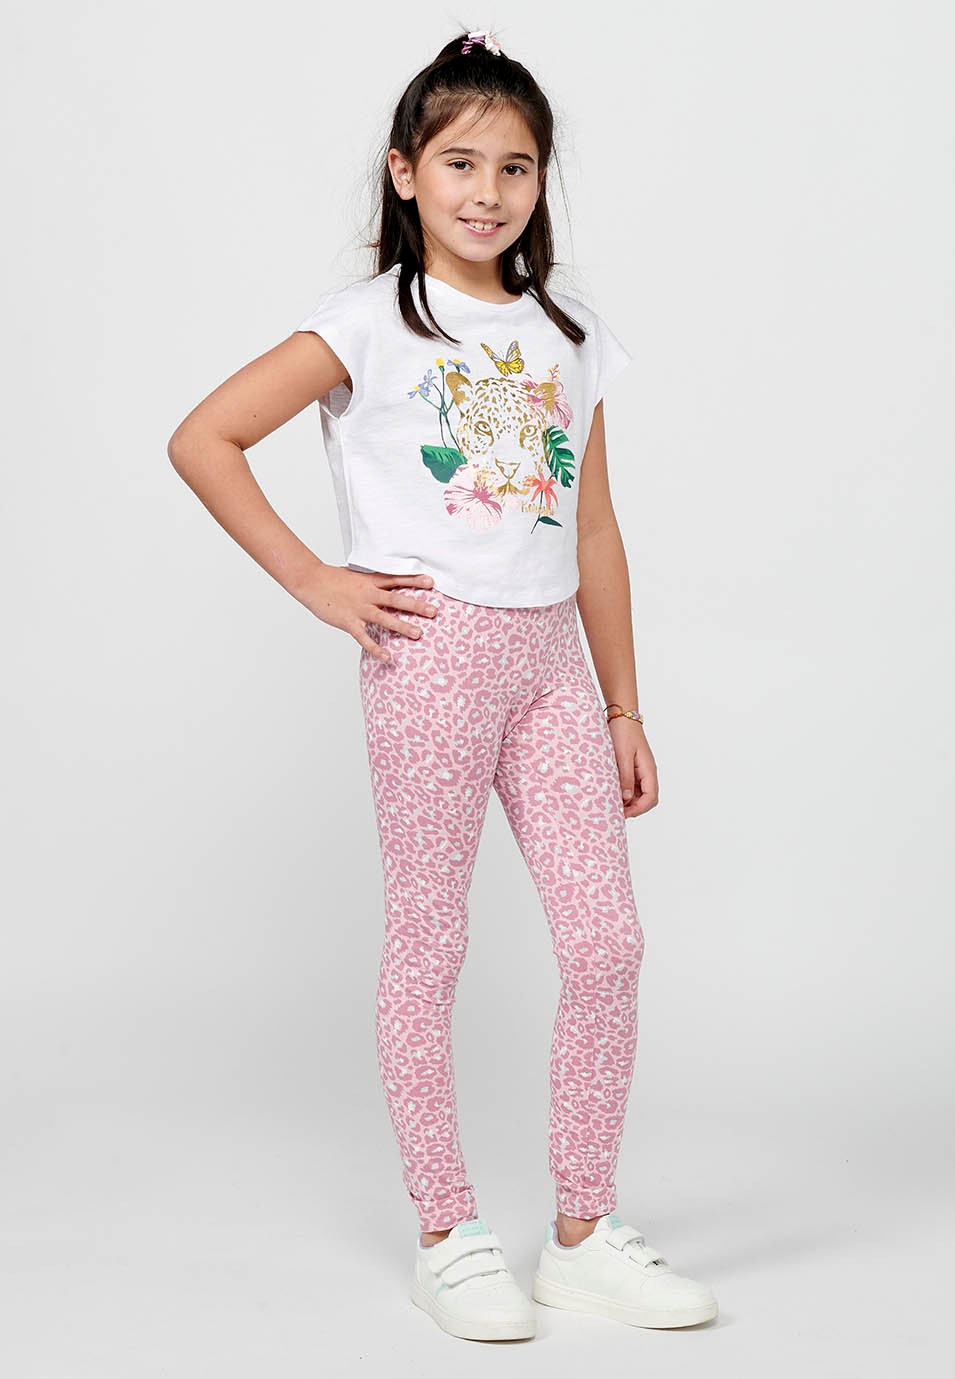 Pack of two long leggings, one of them with an animal print and elastic waistband in Multicolor for Girls 2